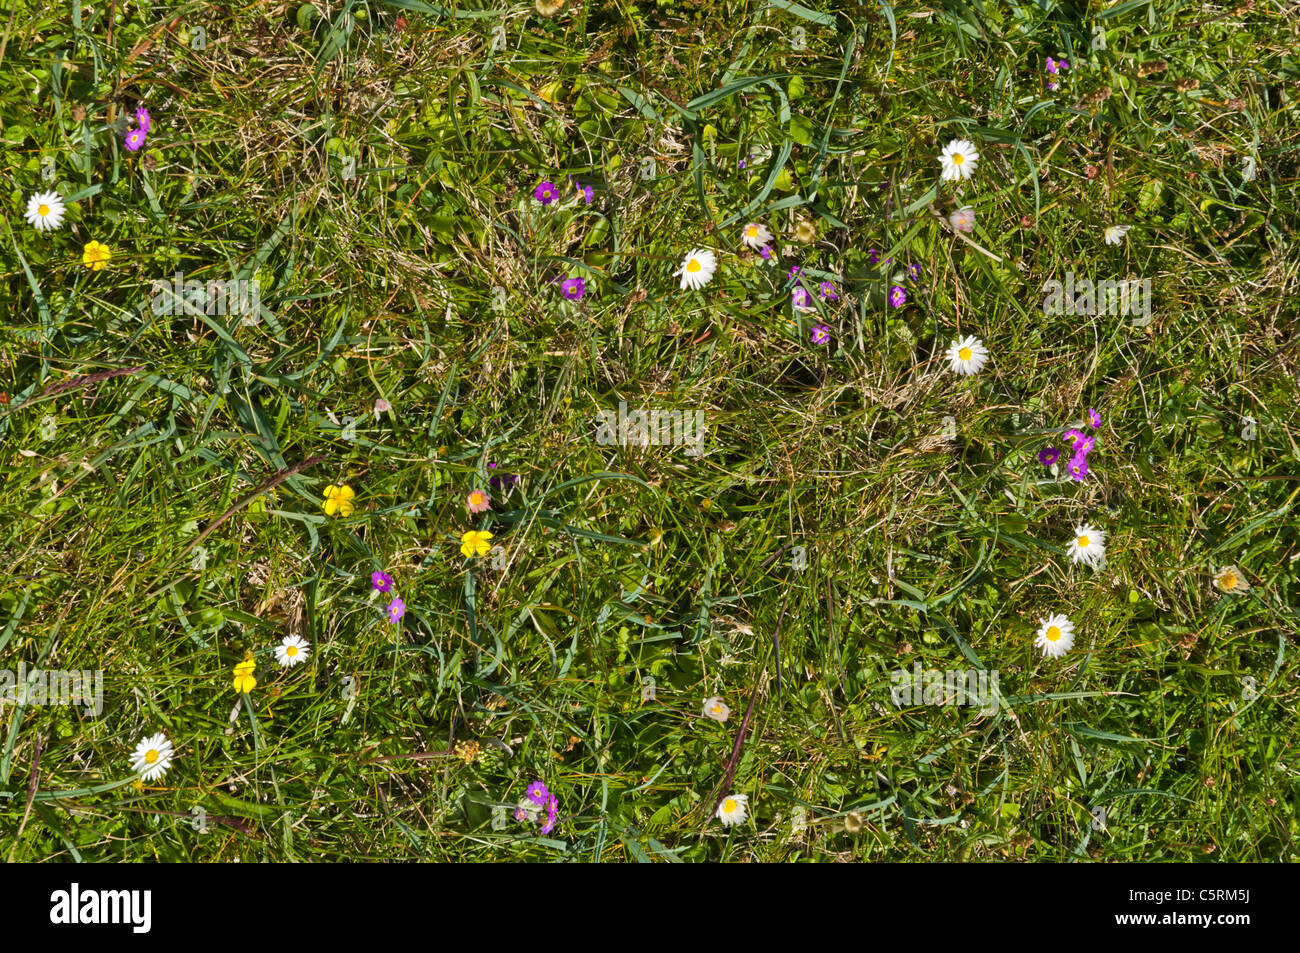 dh  WILDFLOWERS UK Rousay wildflowers Primula Scotica seacliff grass wild flowers field Stock Photo